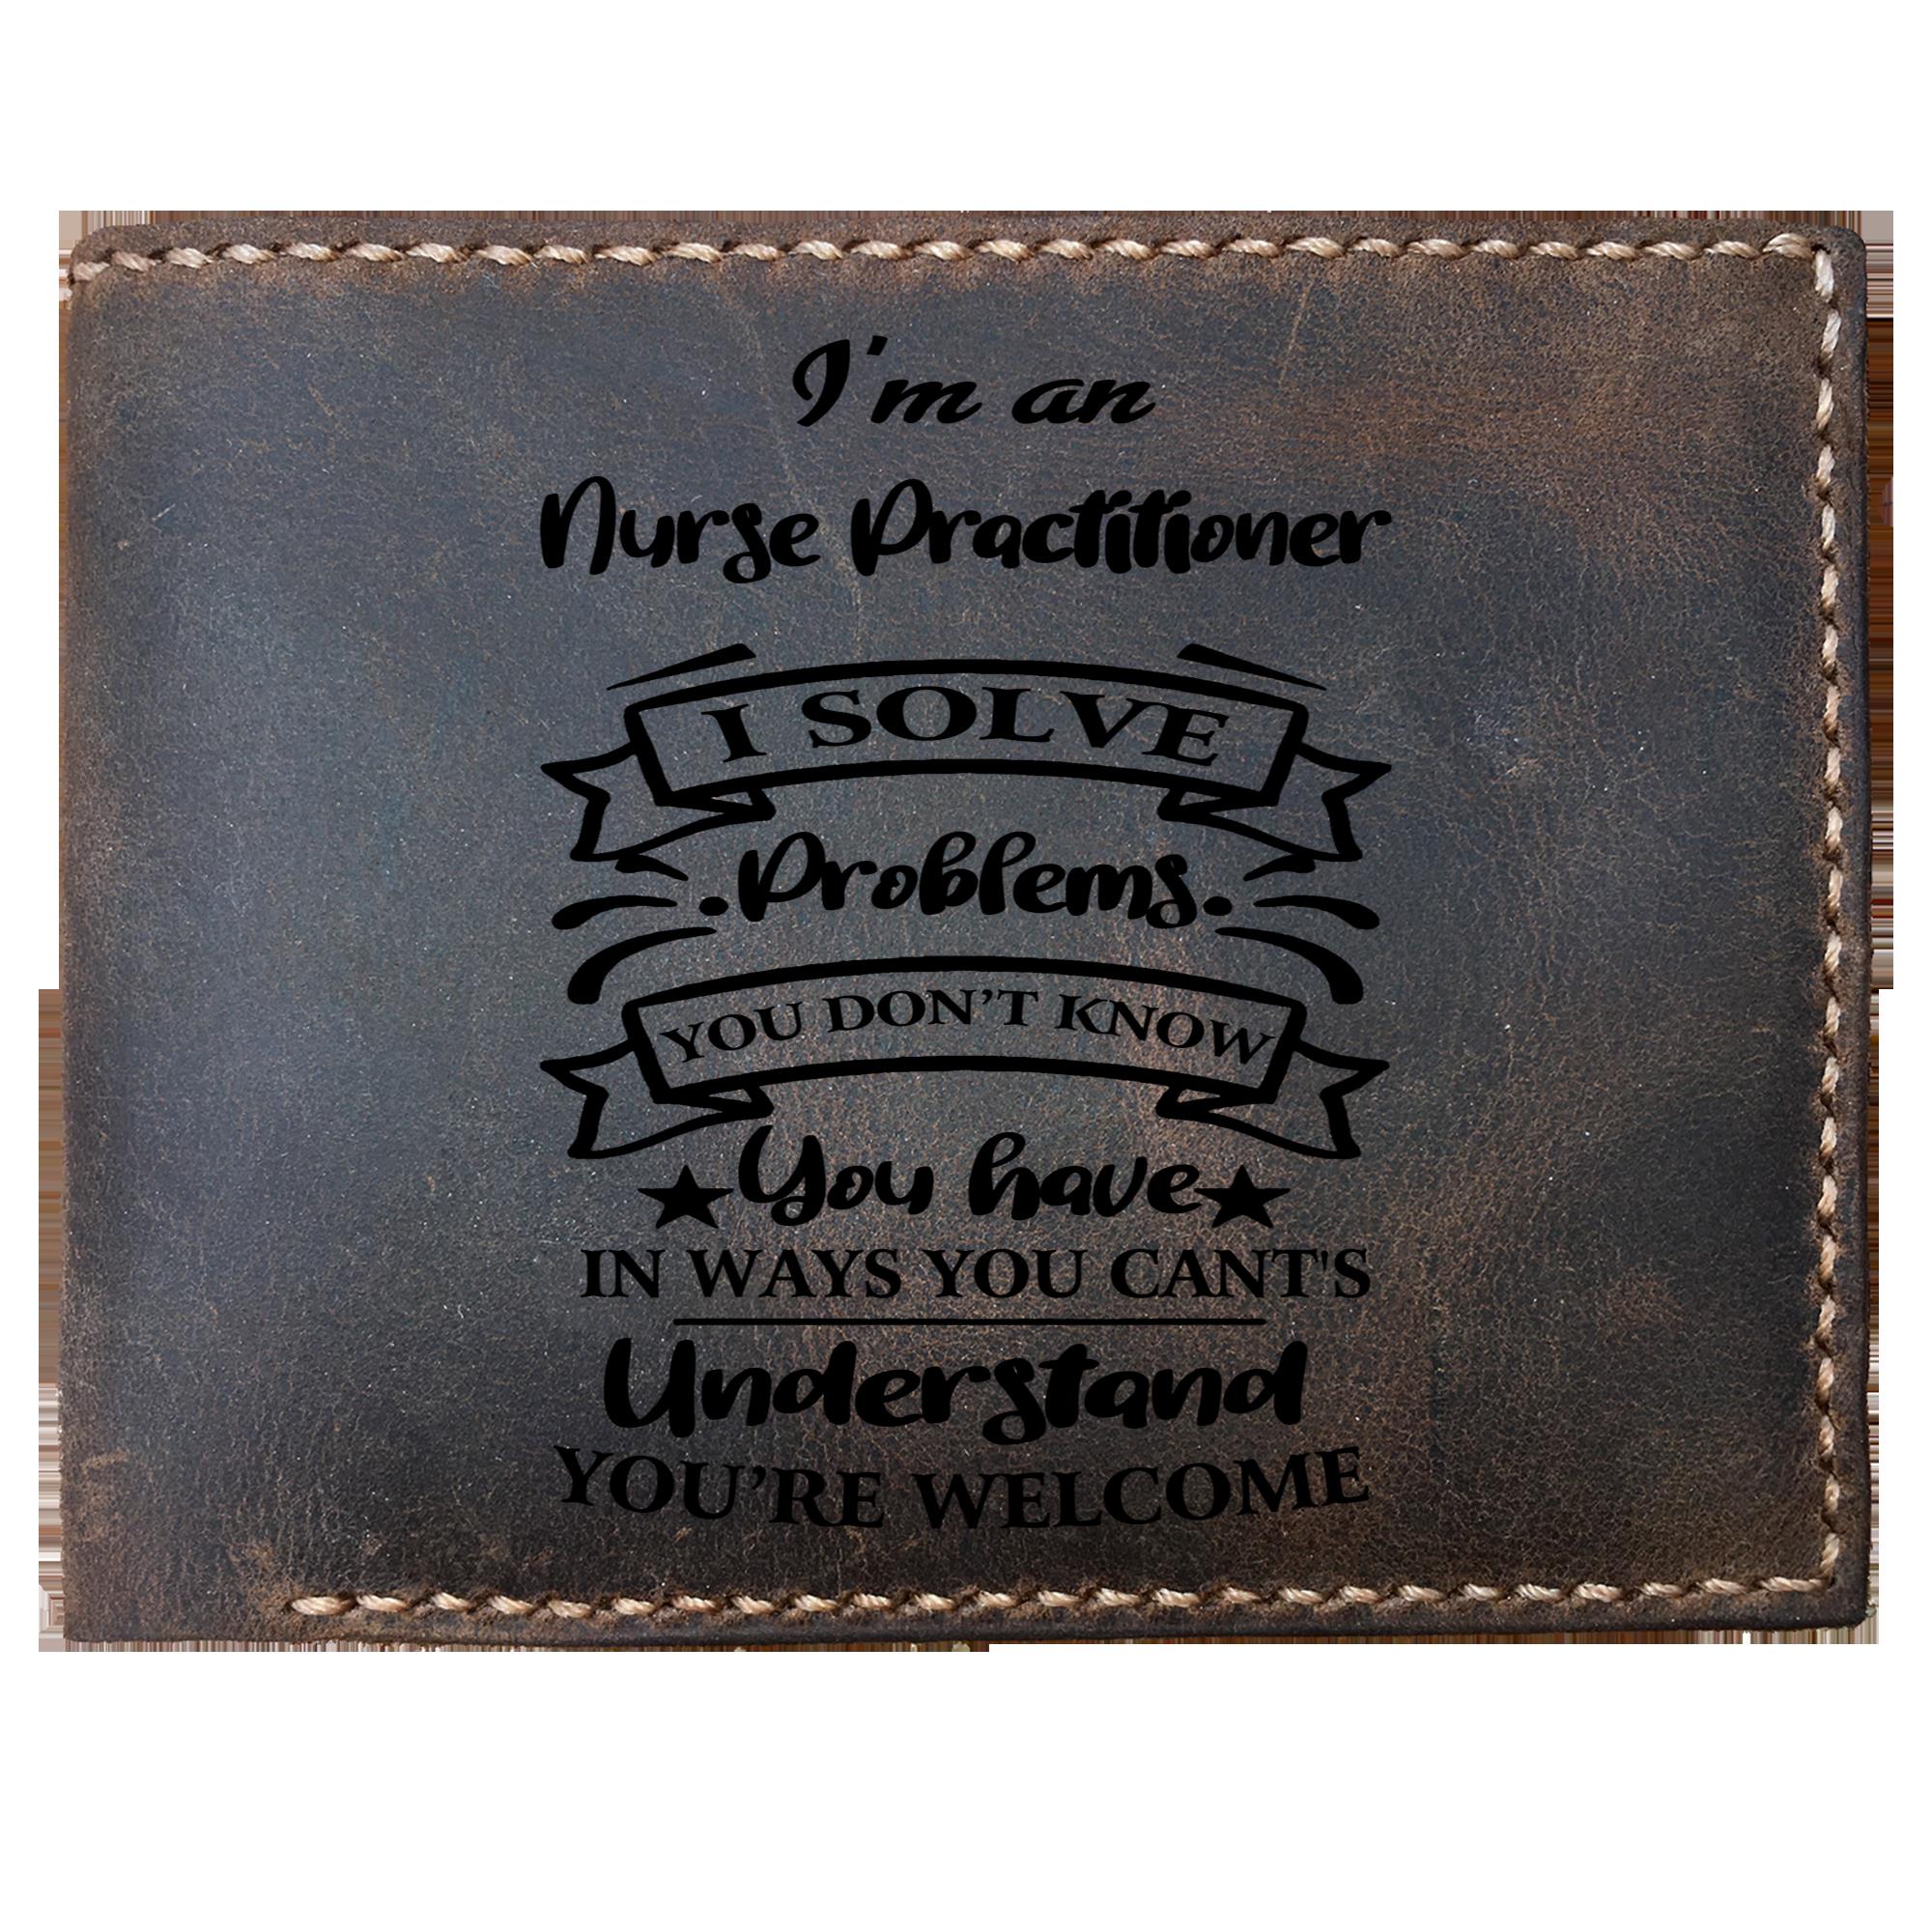 Skitongifts Funny Custom Laser Engraved Bifold Leather Wallet For Men, I'm an Nurse Practitioner Solve Problems, Father's Day Gifts